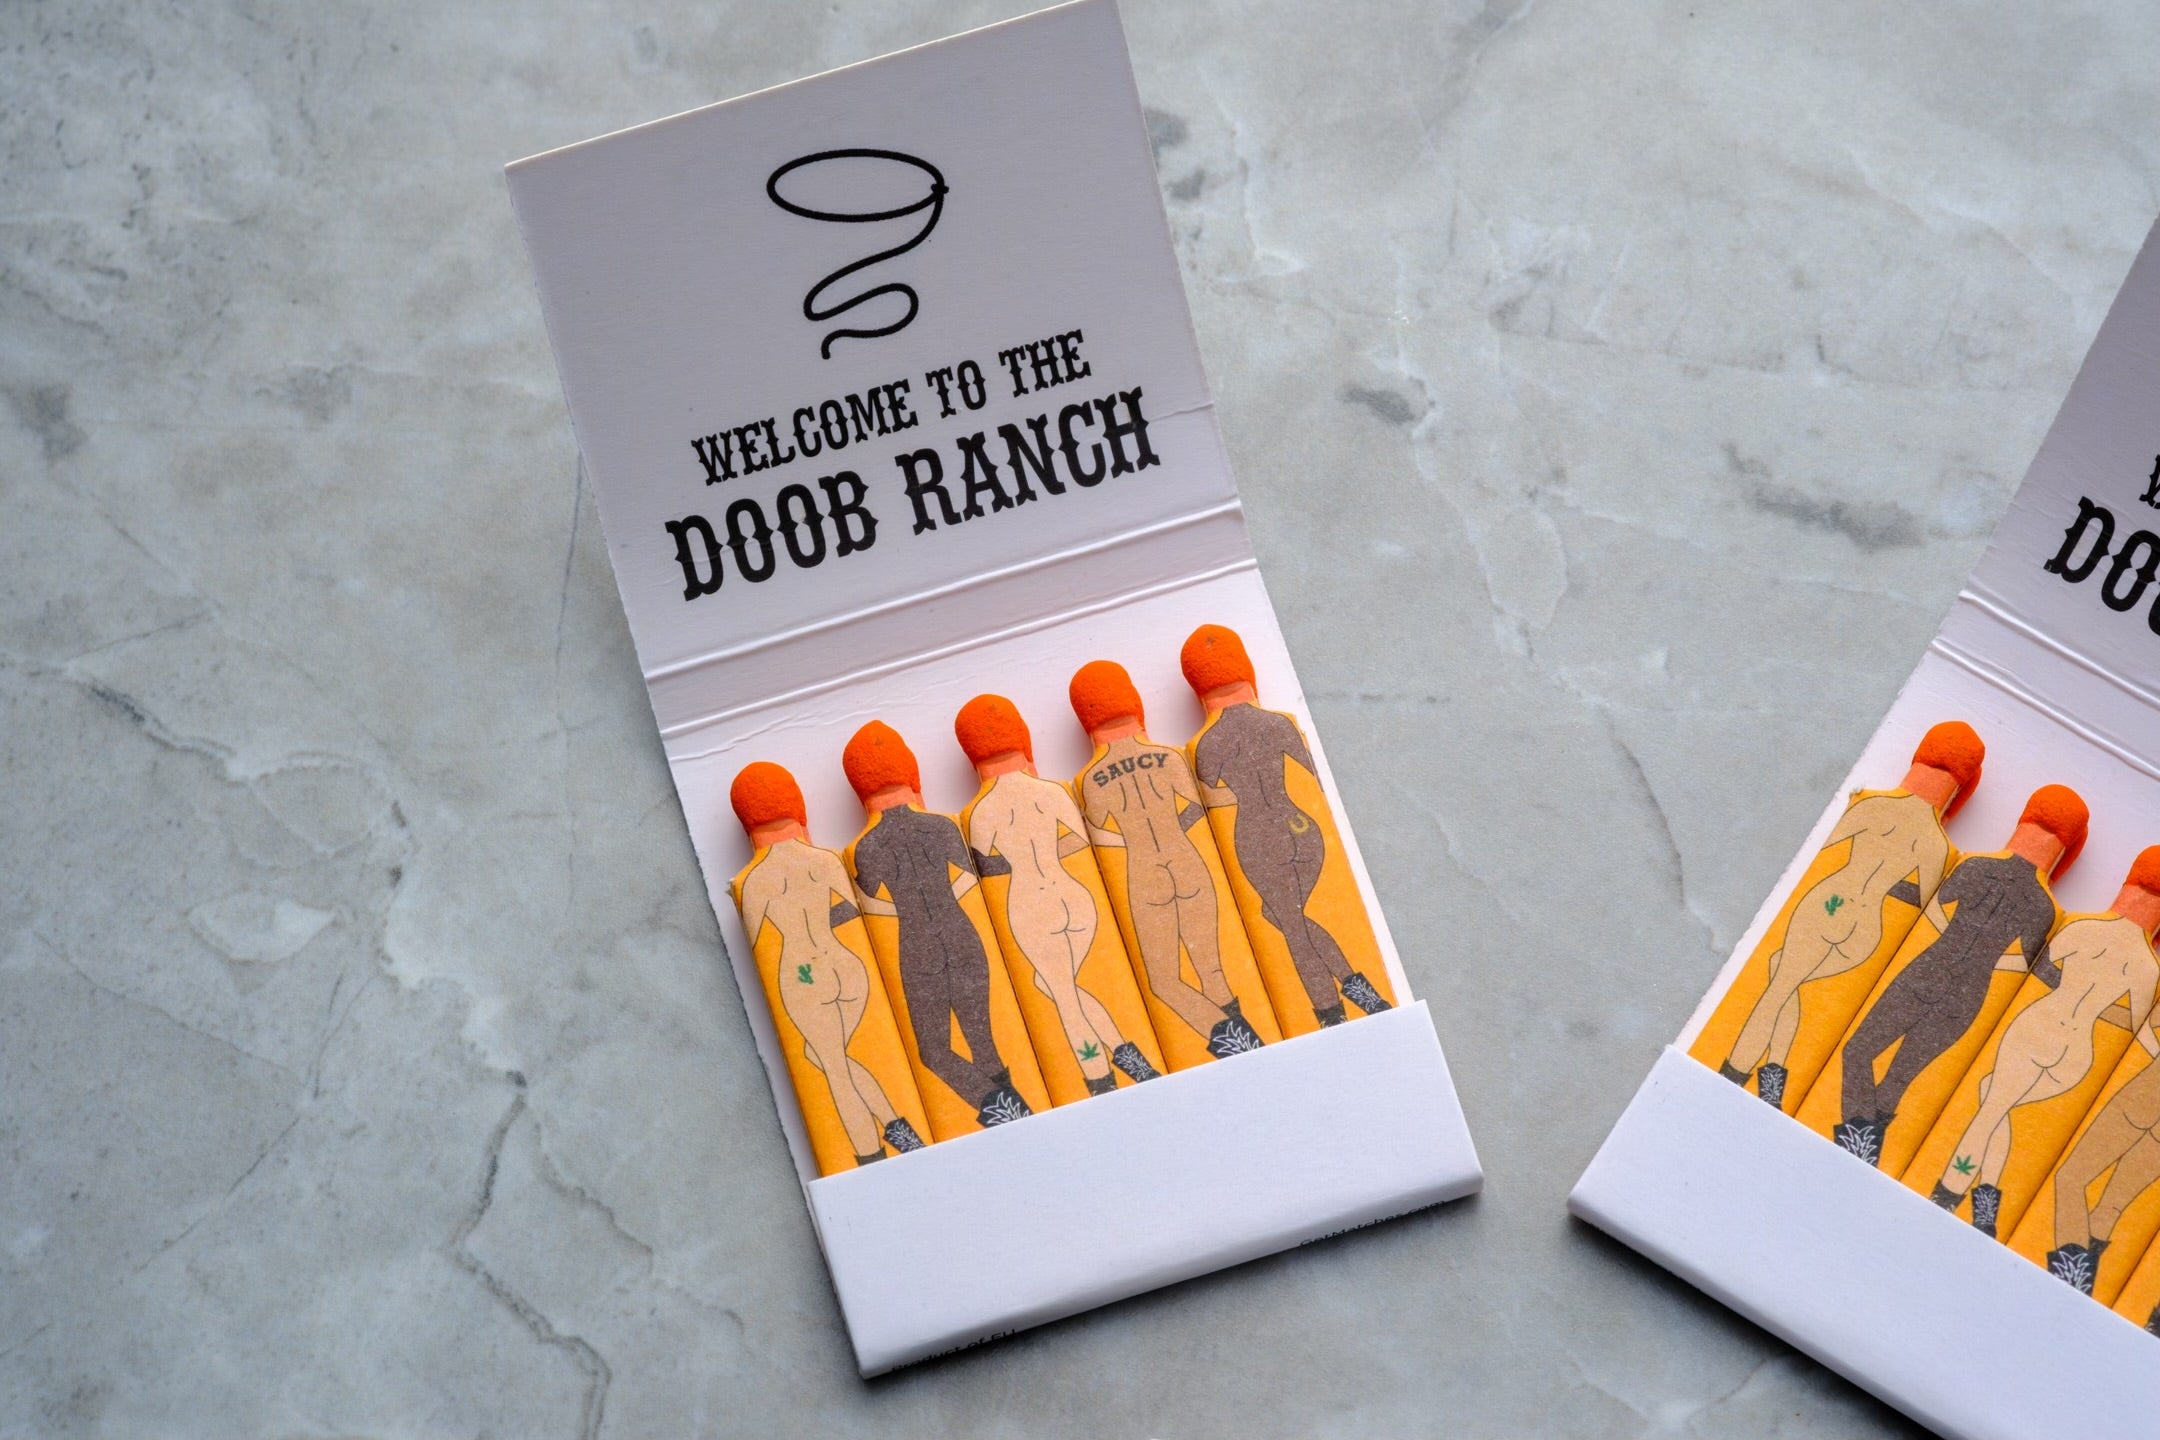 Rogue Paq x Dose of Saucy 'Welcome To The Doob Ranch' Matches